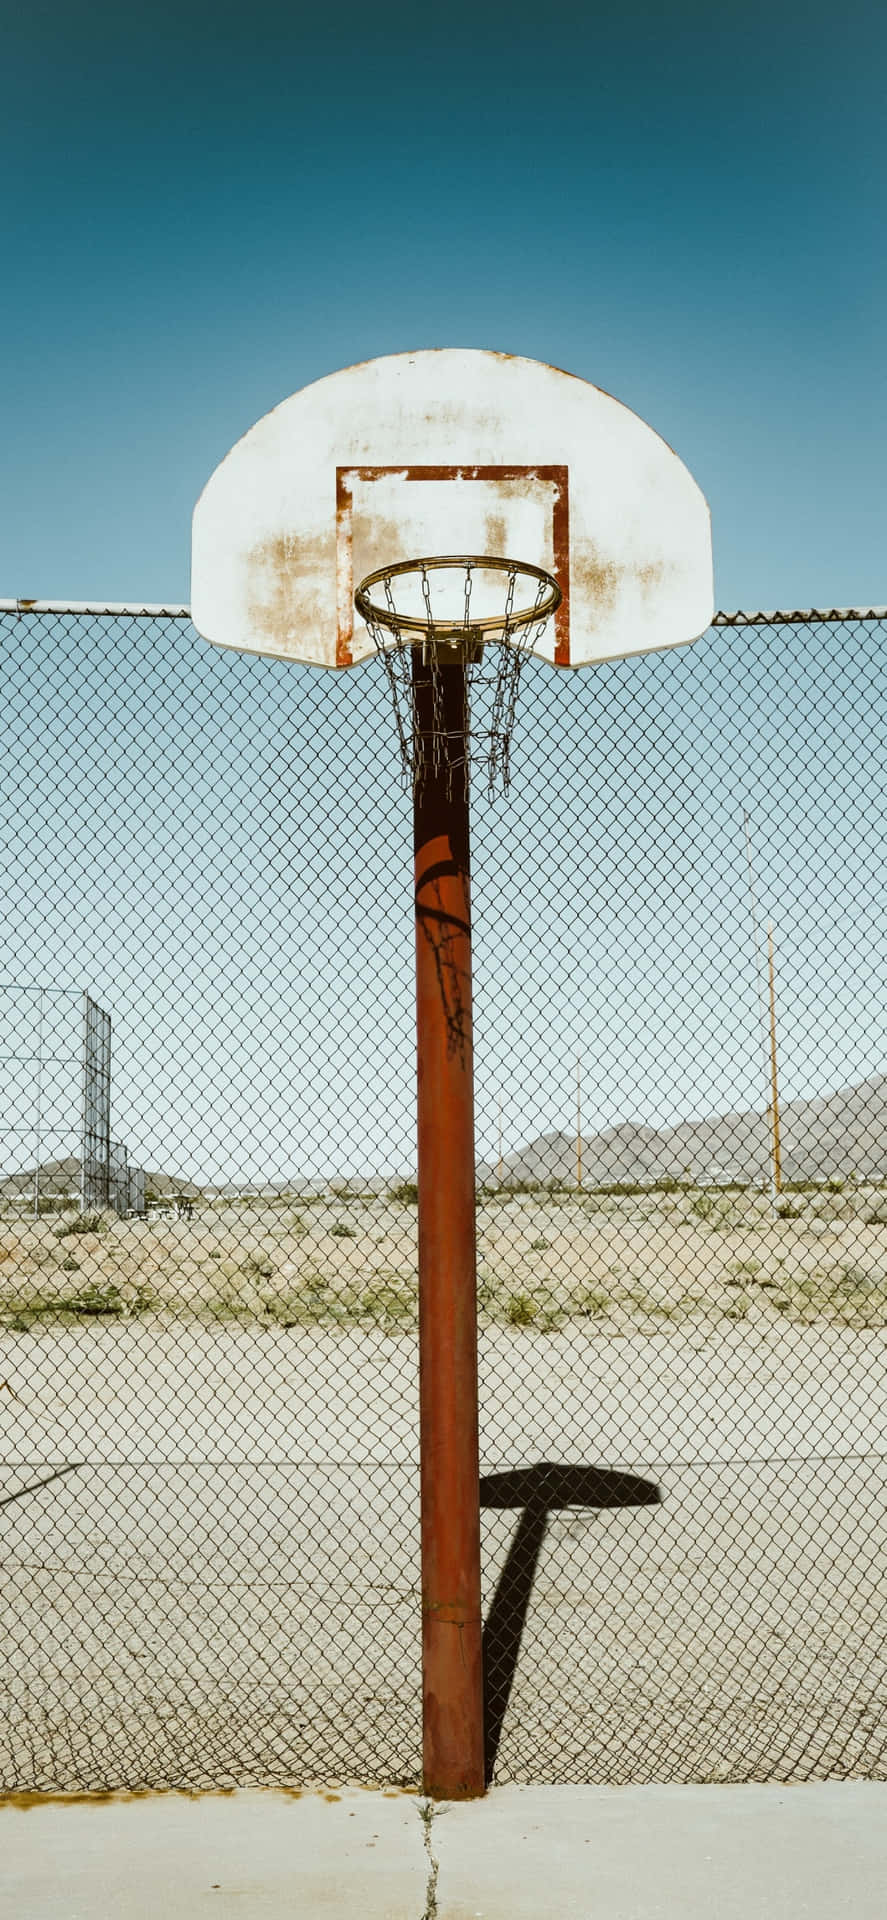 Iphone Xs Basketball Old Court Background